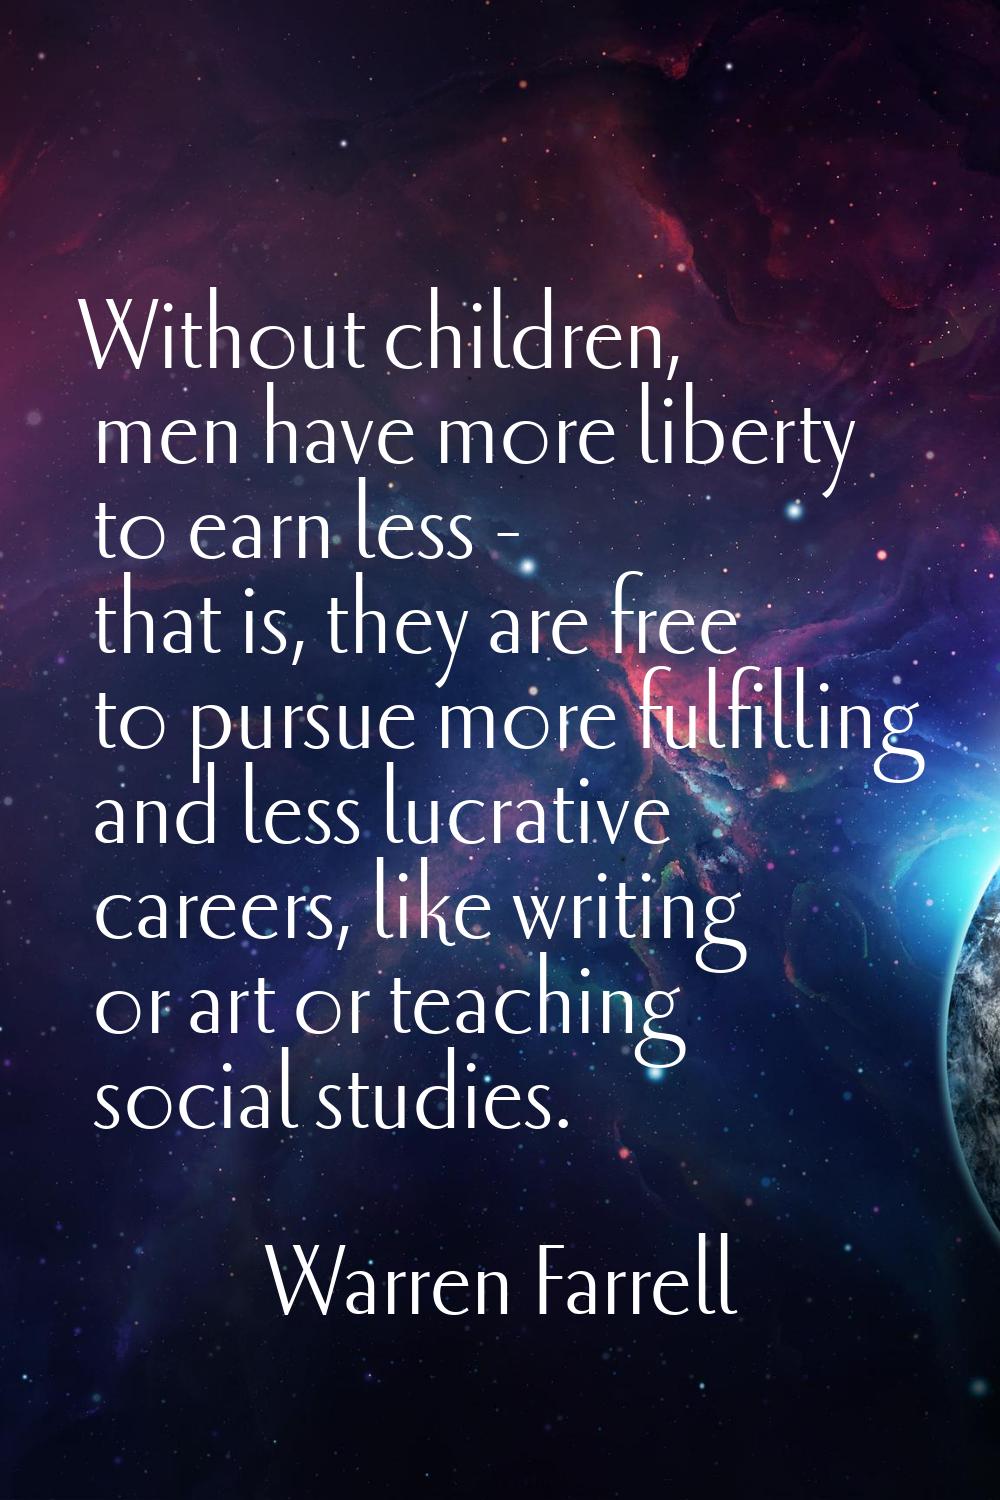 Without children, men have more liberty to earn less - that is, they are free to pursue more fulfil